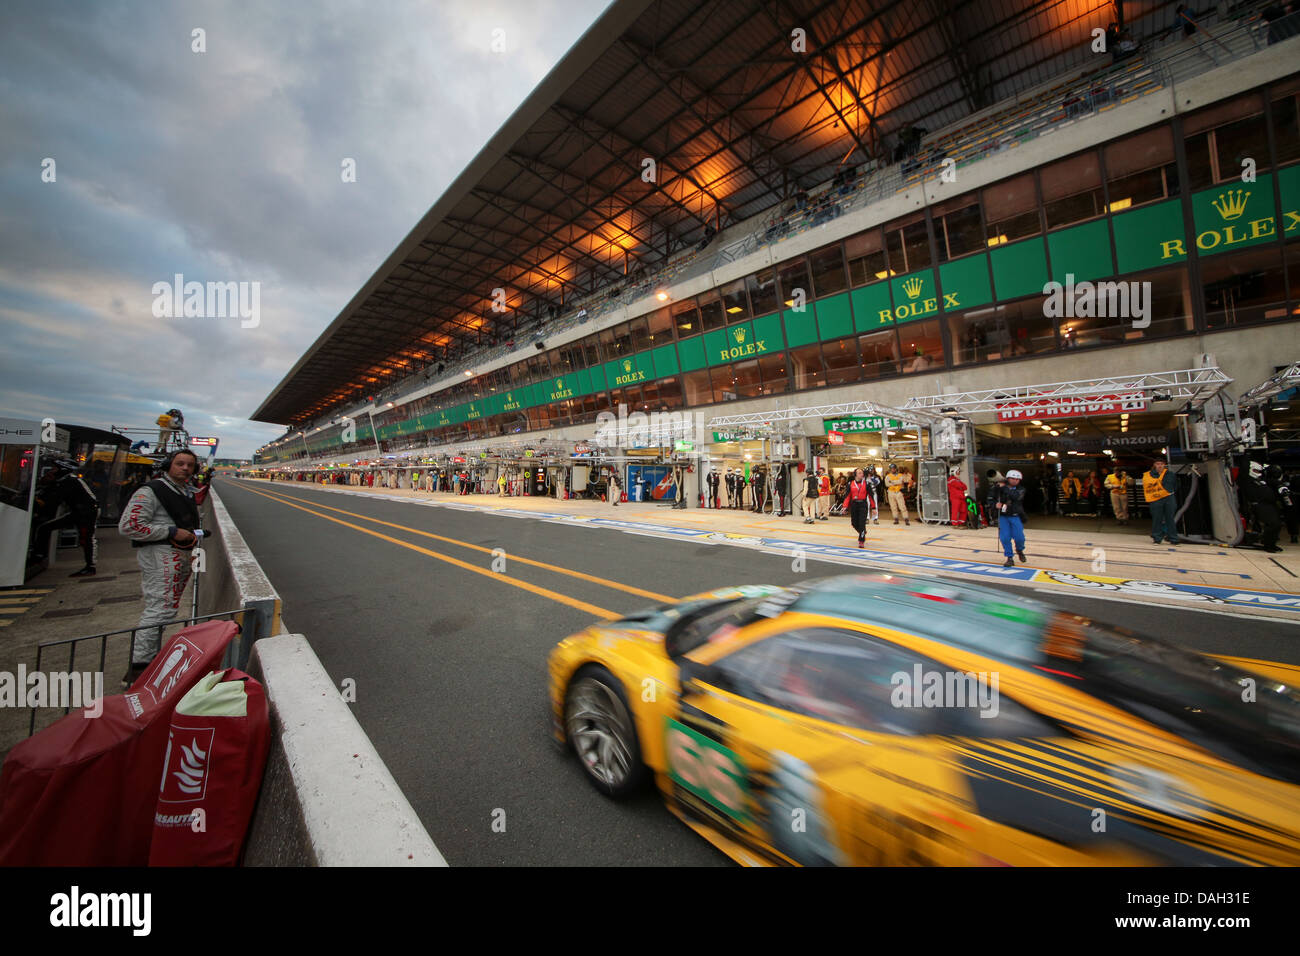 LE MANS, FRANCE - JUNE 23 Ferrari #66 competes in the 24 hours of Le Mans 2013 Stock Photo